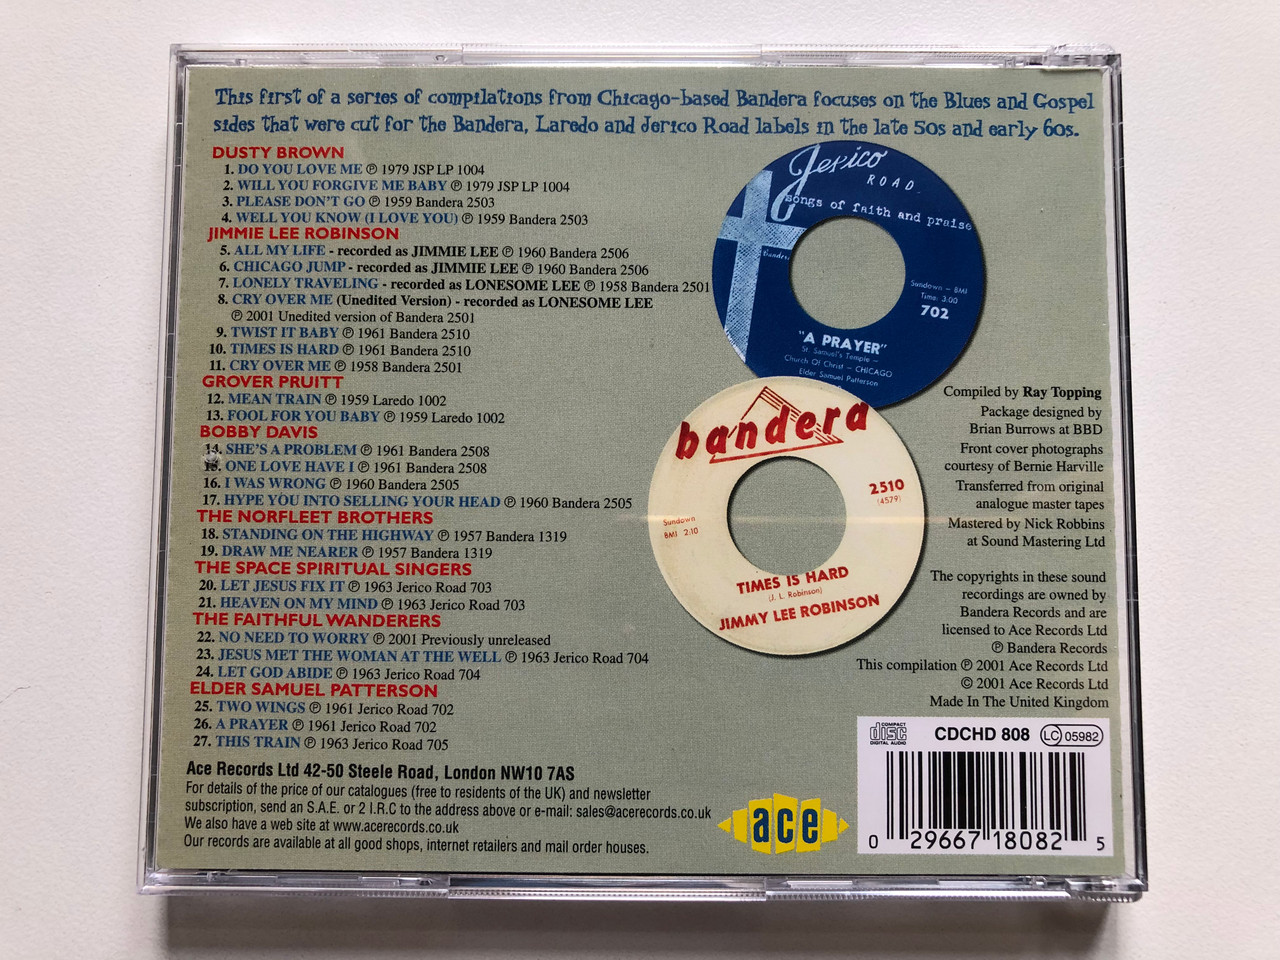 https://cdn10.bigcommerce.com/s-62bdpkt7pb/products/0/images/307551/Bandera_Blues_And_Gospel_From_The_Bandera_Laredo_And_Jerico_Road_Labels_Of_Chicago_Ace_Audio_CD_2001_CDCHD_808_2__23716.1698742064.1280.1280.JPG?c=2